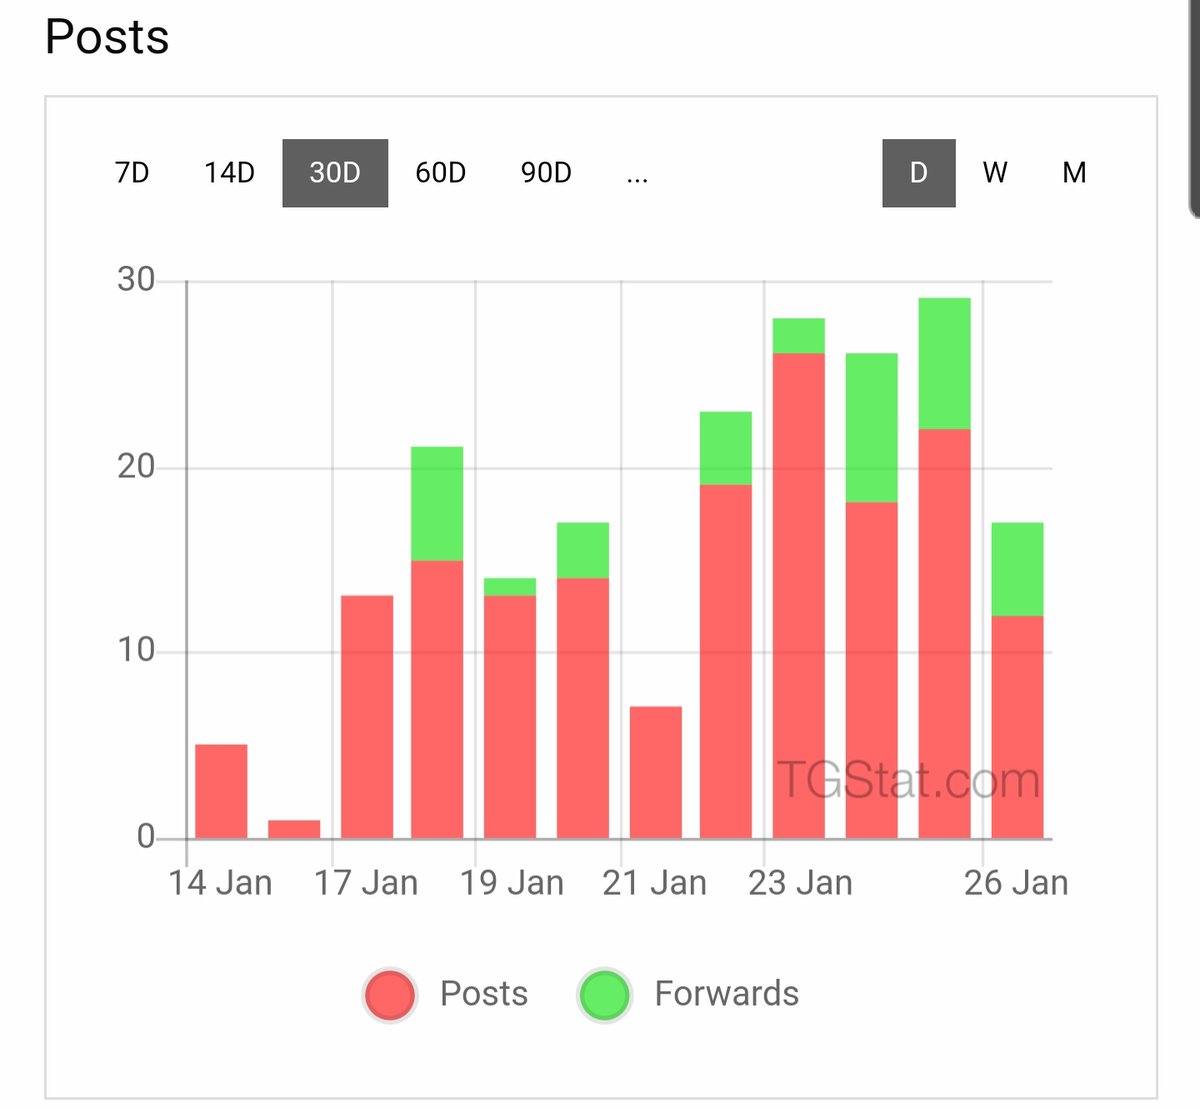 2/ There has also been a fair amount of post forwarding that has been taking place in these channels as their content is spread. The comments per posts have also appeared to increase and the volume of messages per days in chats associated to the channels are steady or increasing